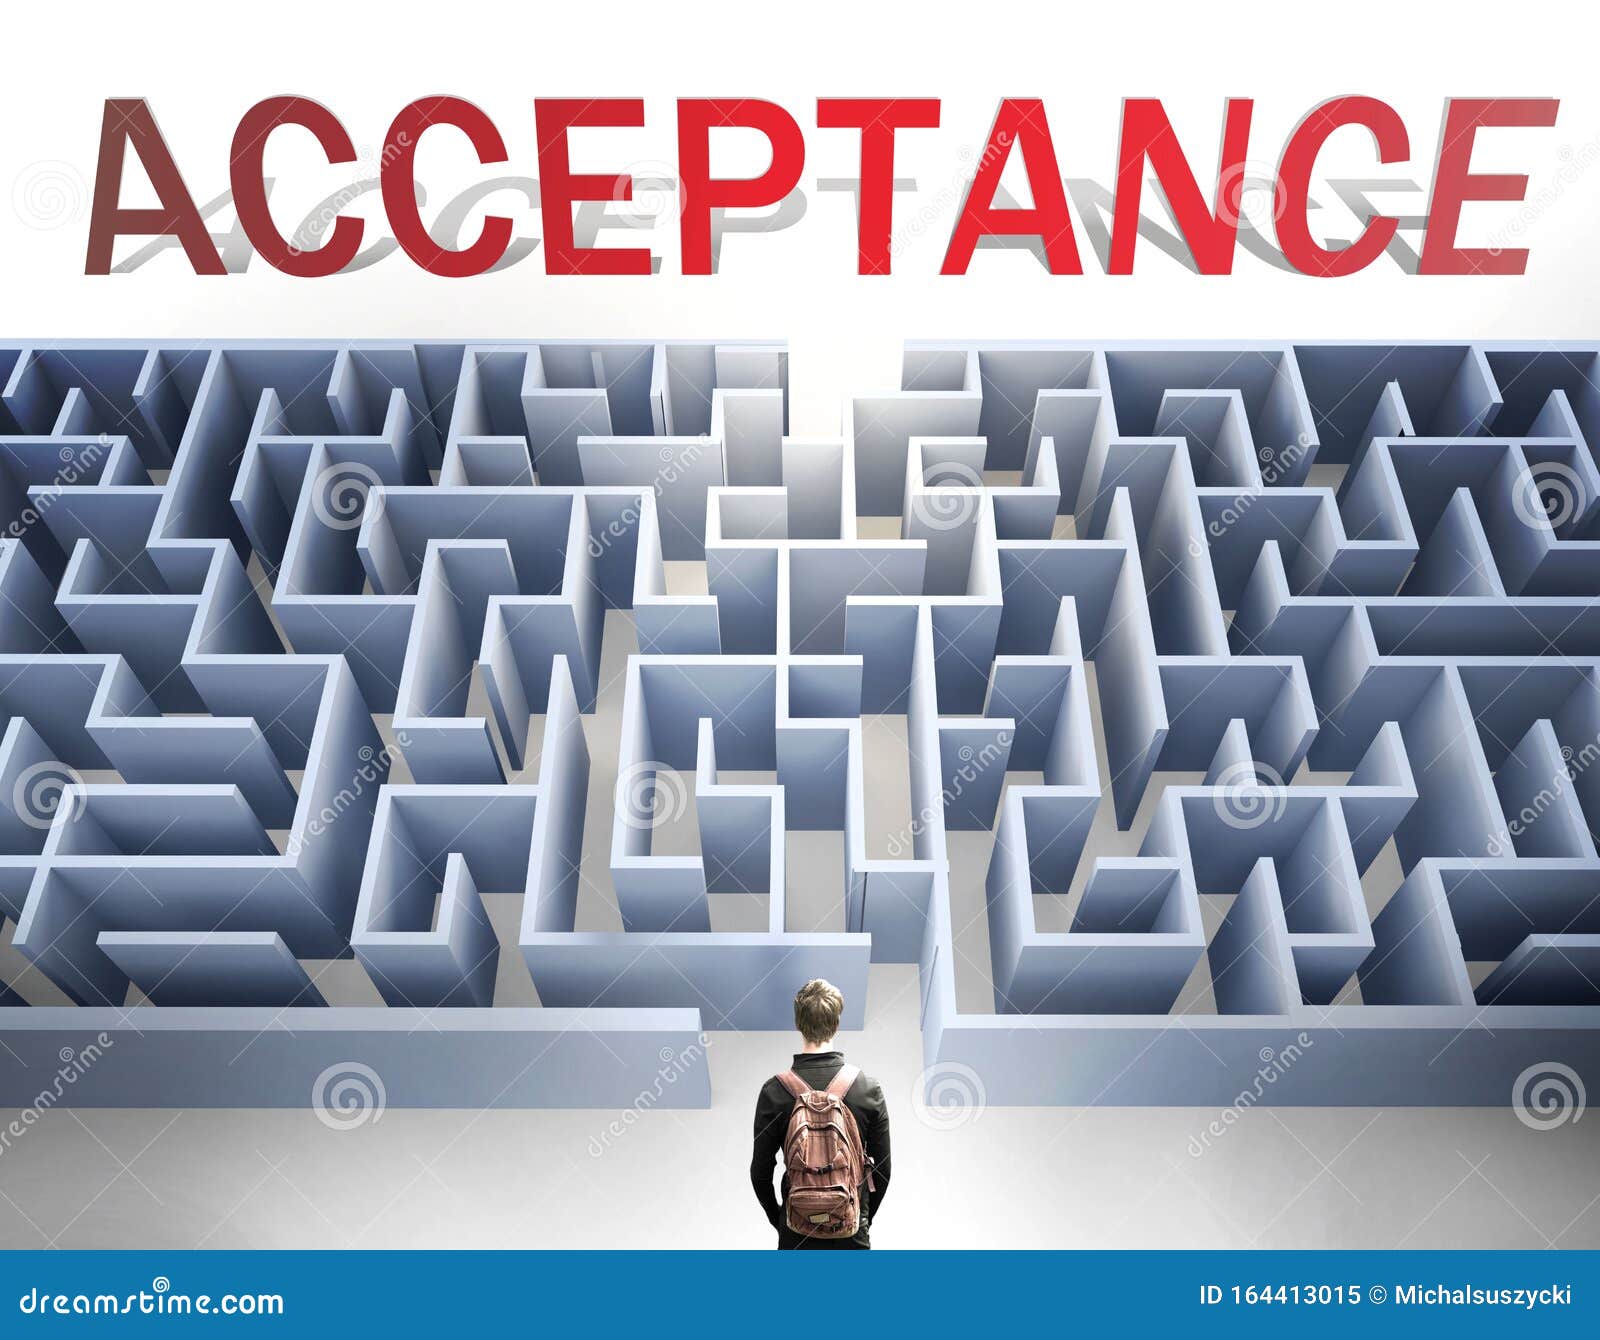 acceptance can be hard to get - pictured as a word acceptance and a maze to ize that there is a long and difficult path to